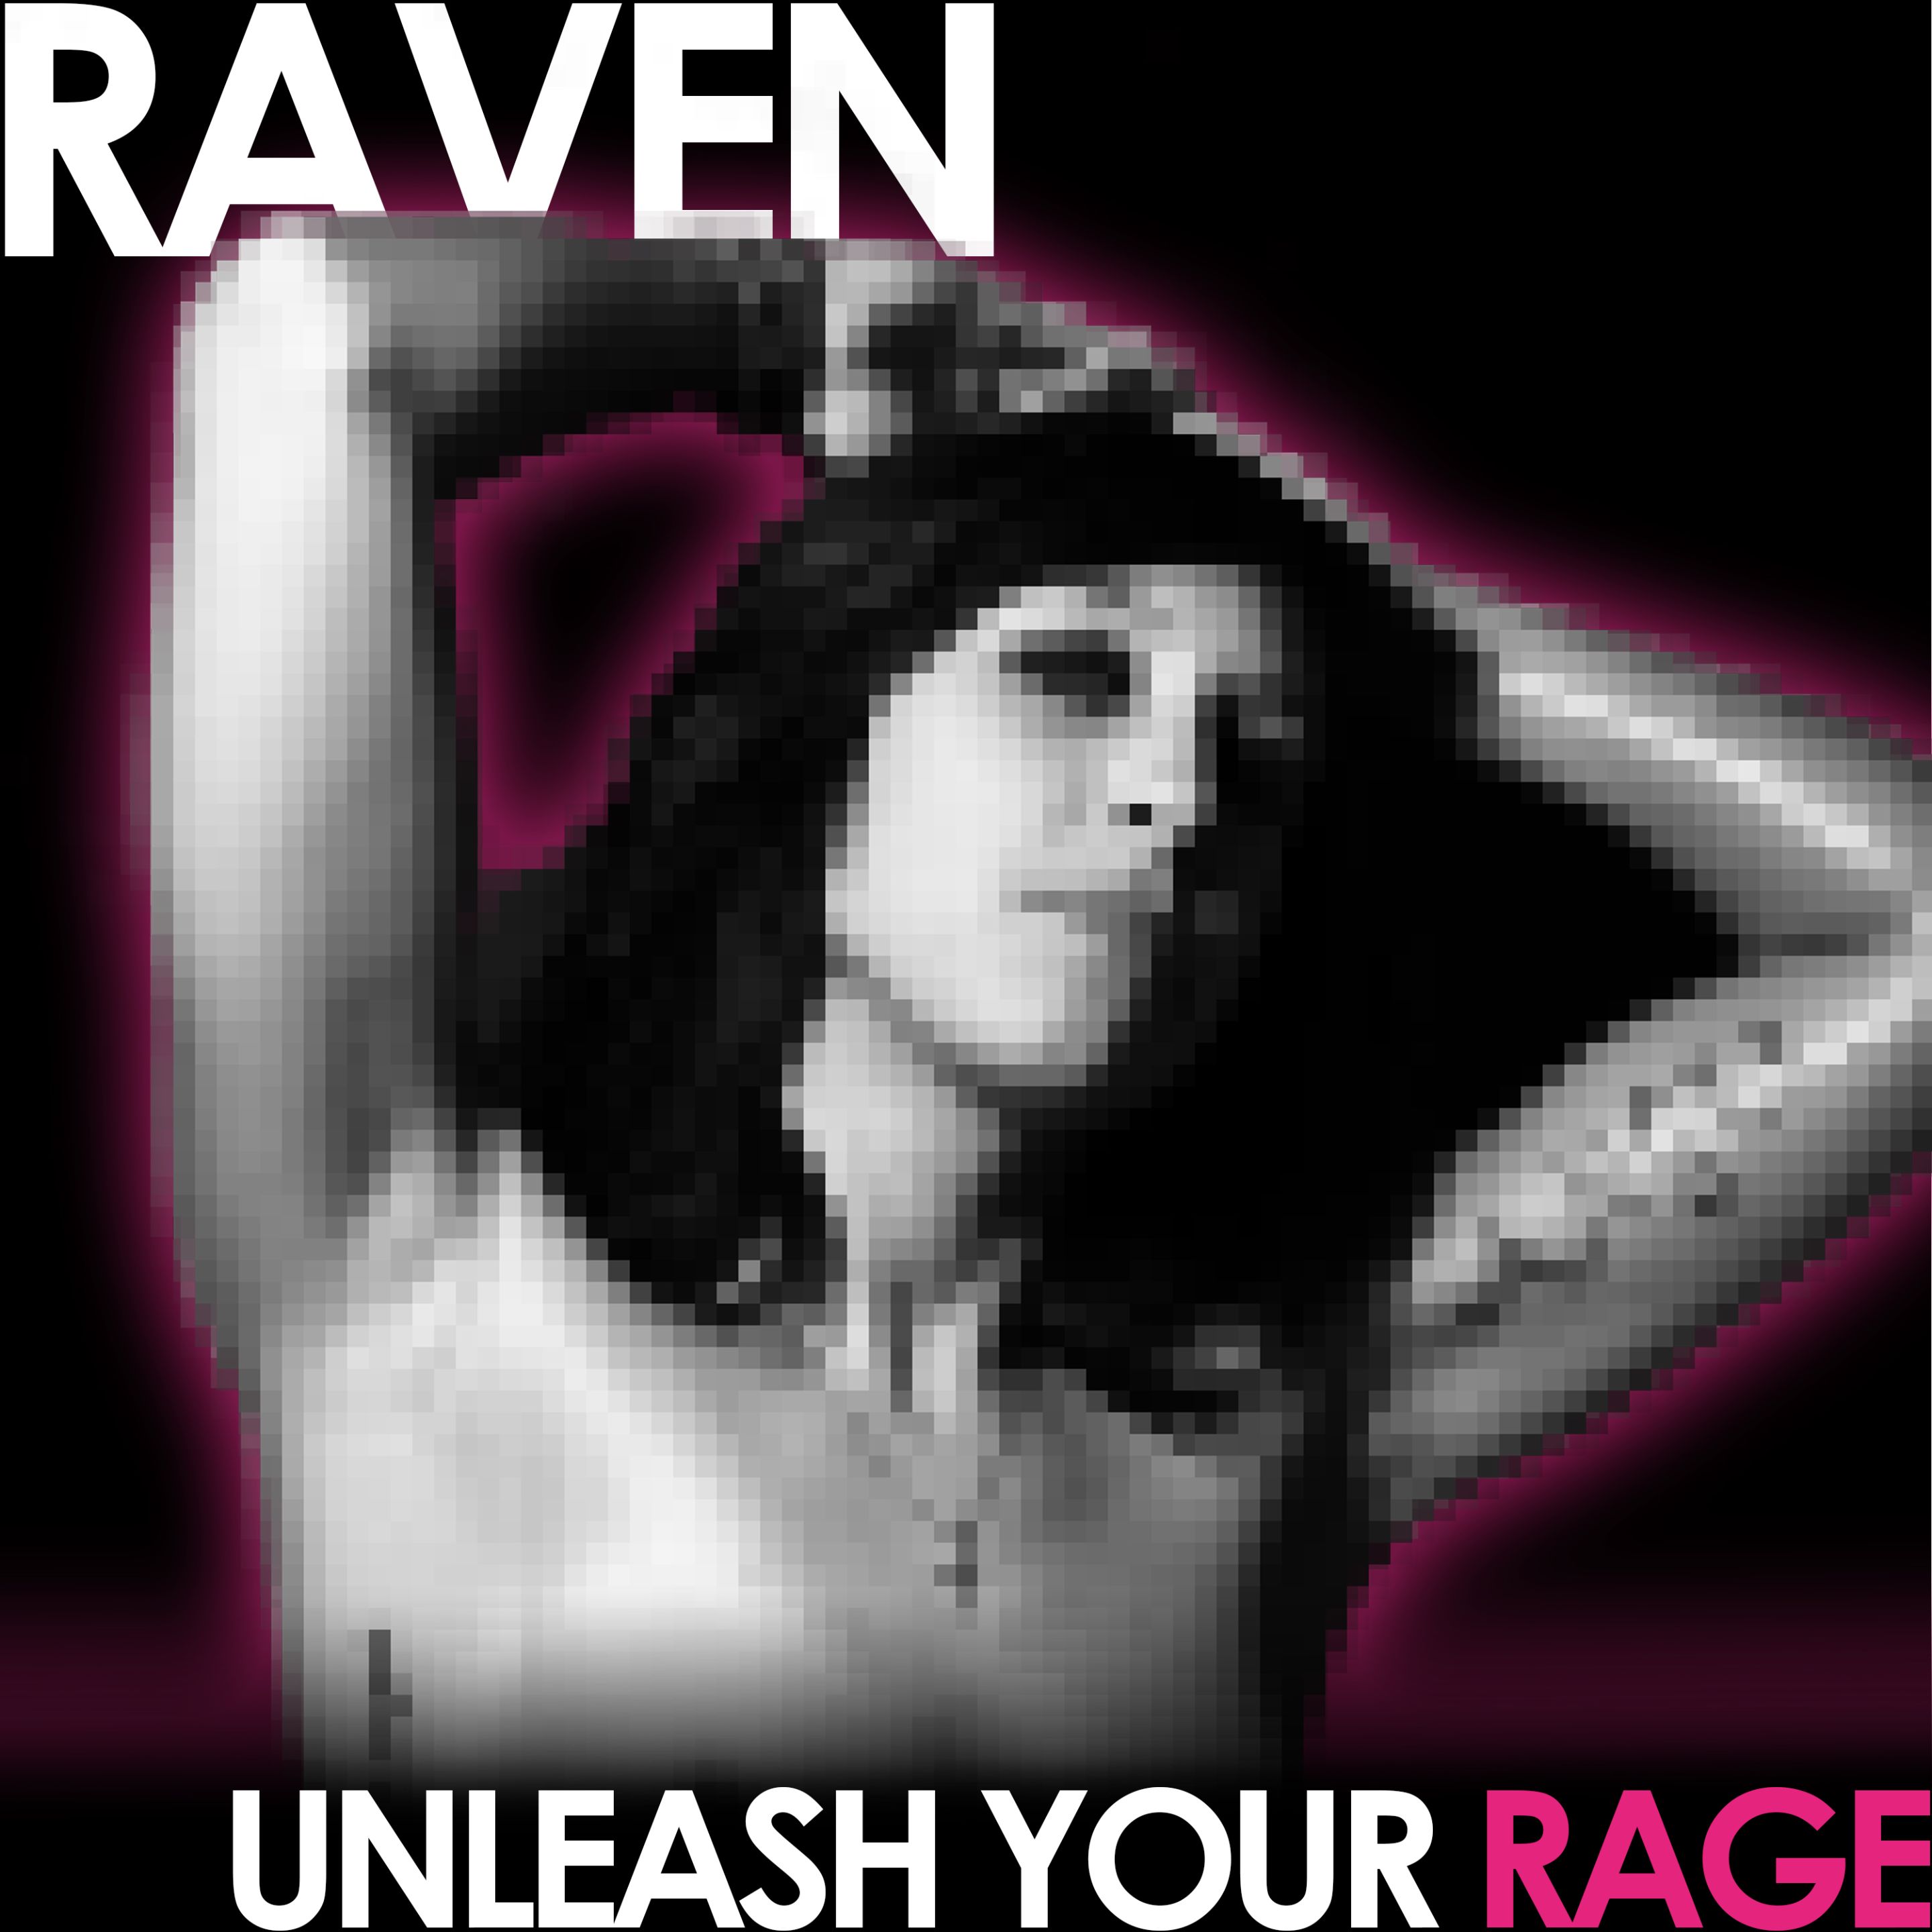 CD Cover Unleash Your Rage.jpg